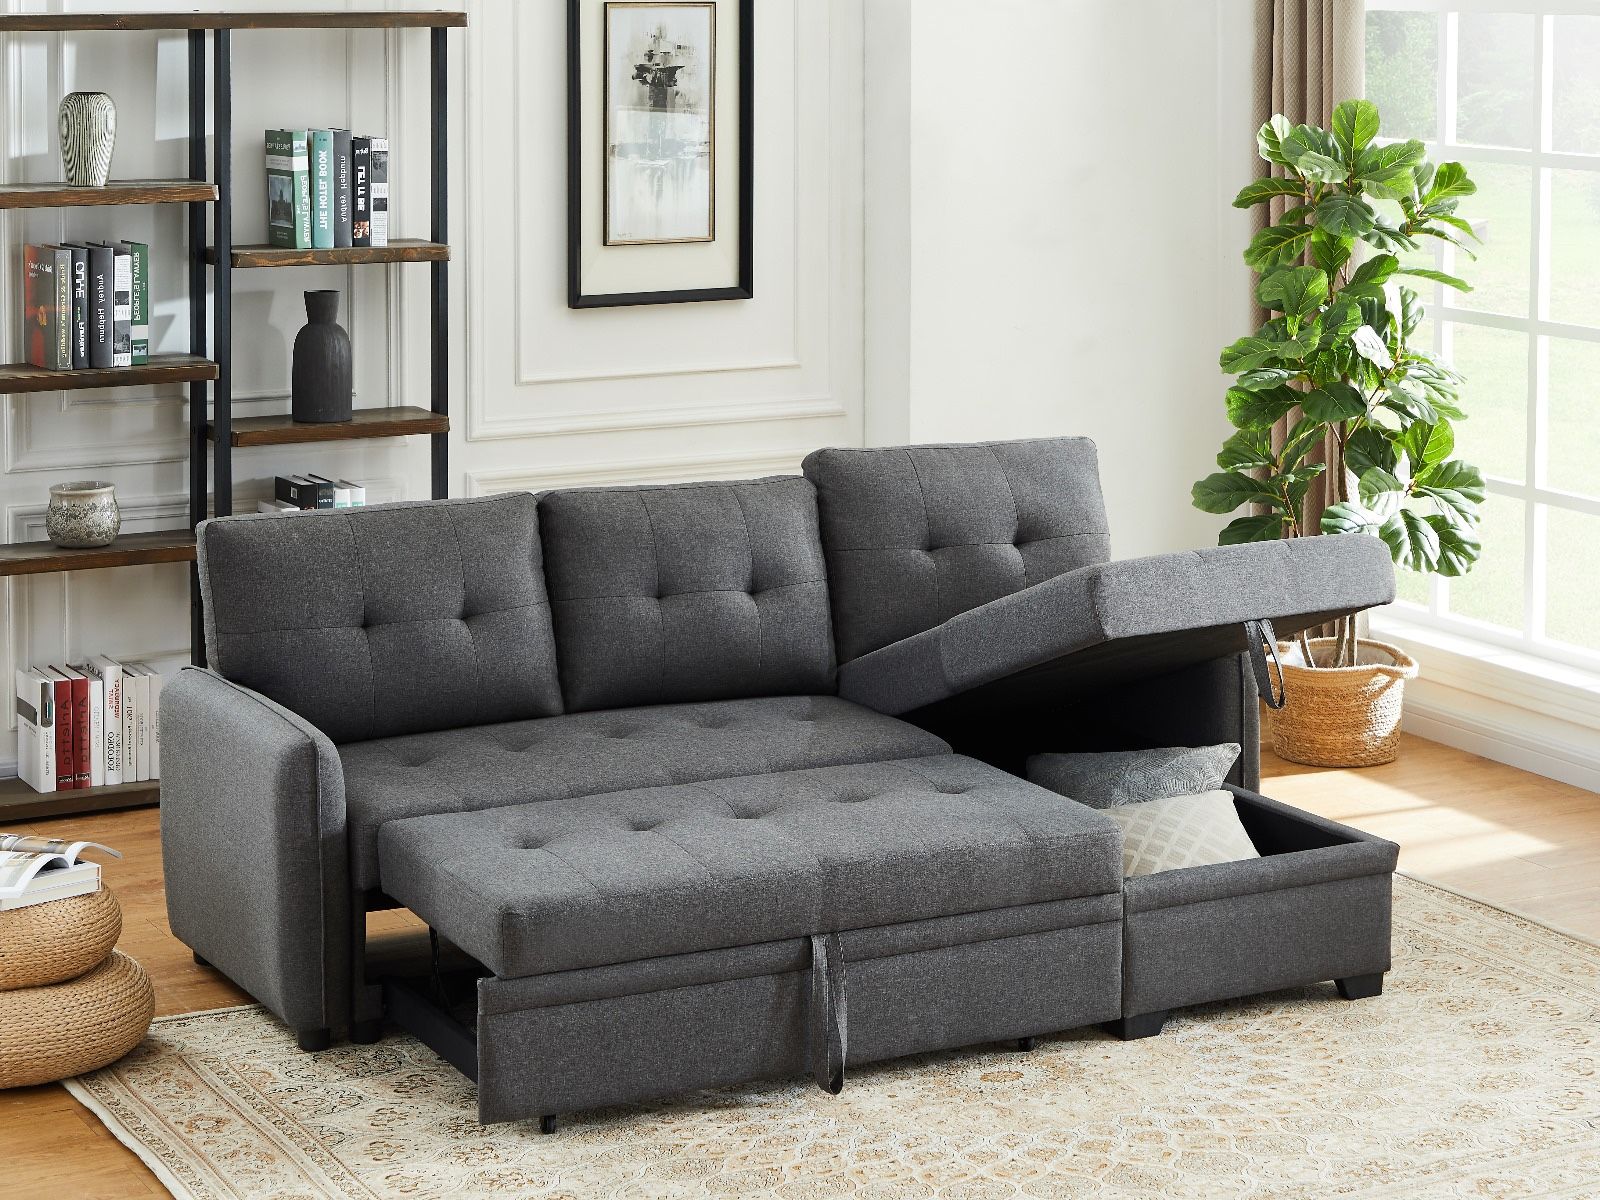 Brand New! Reversible Sectional Sofa Bed, Sofabed, Sofa Bed, Sectional Sofa With Pull Out Bed, Sleeper Sofa, Grey Sectional, Sectionals, Couch